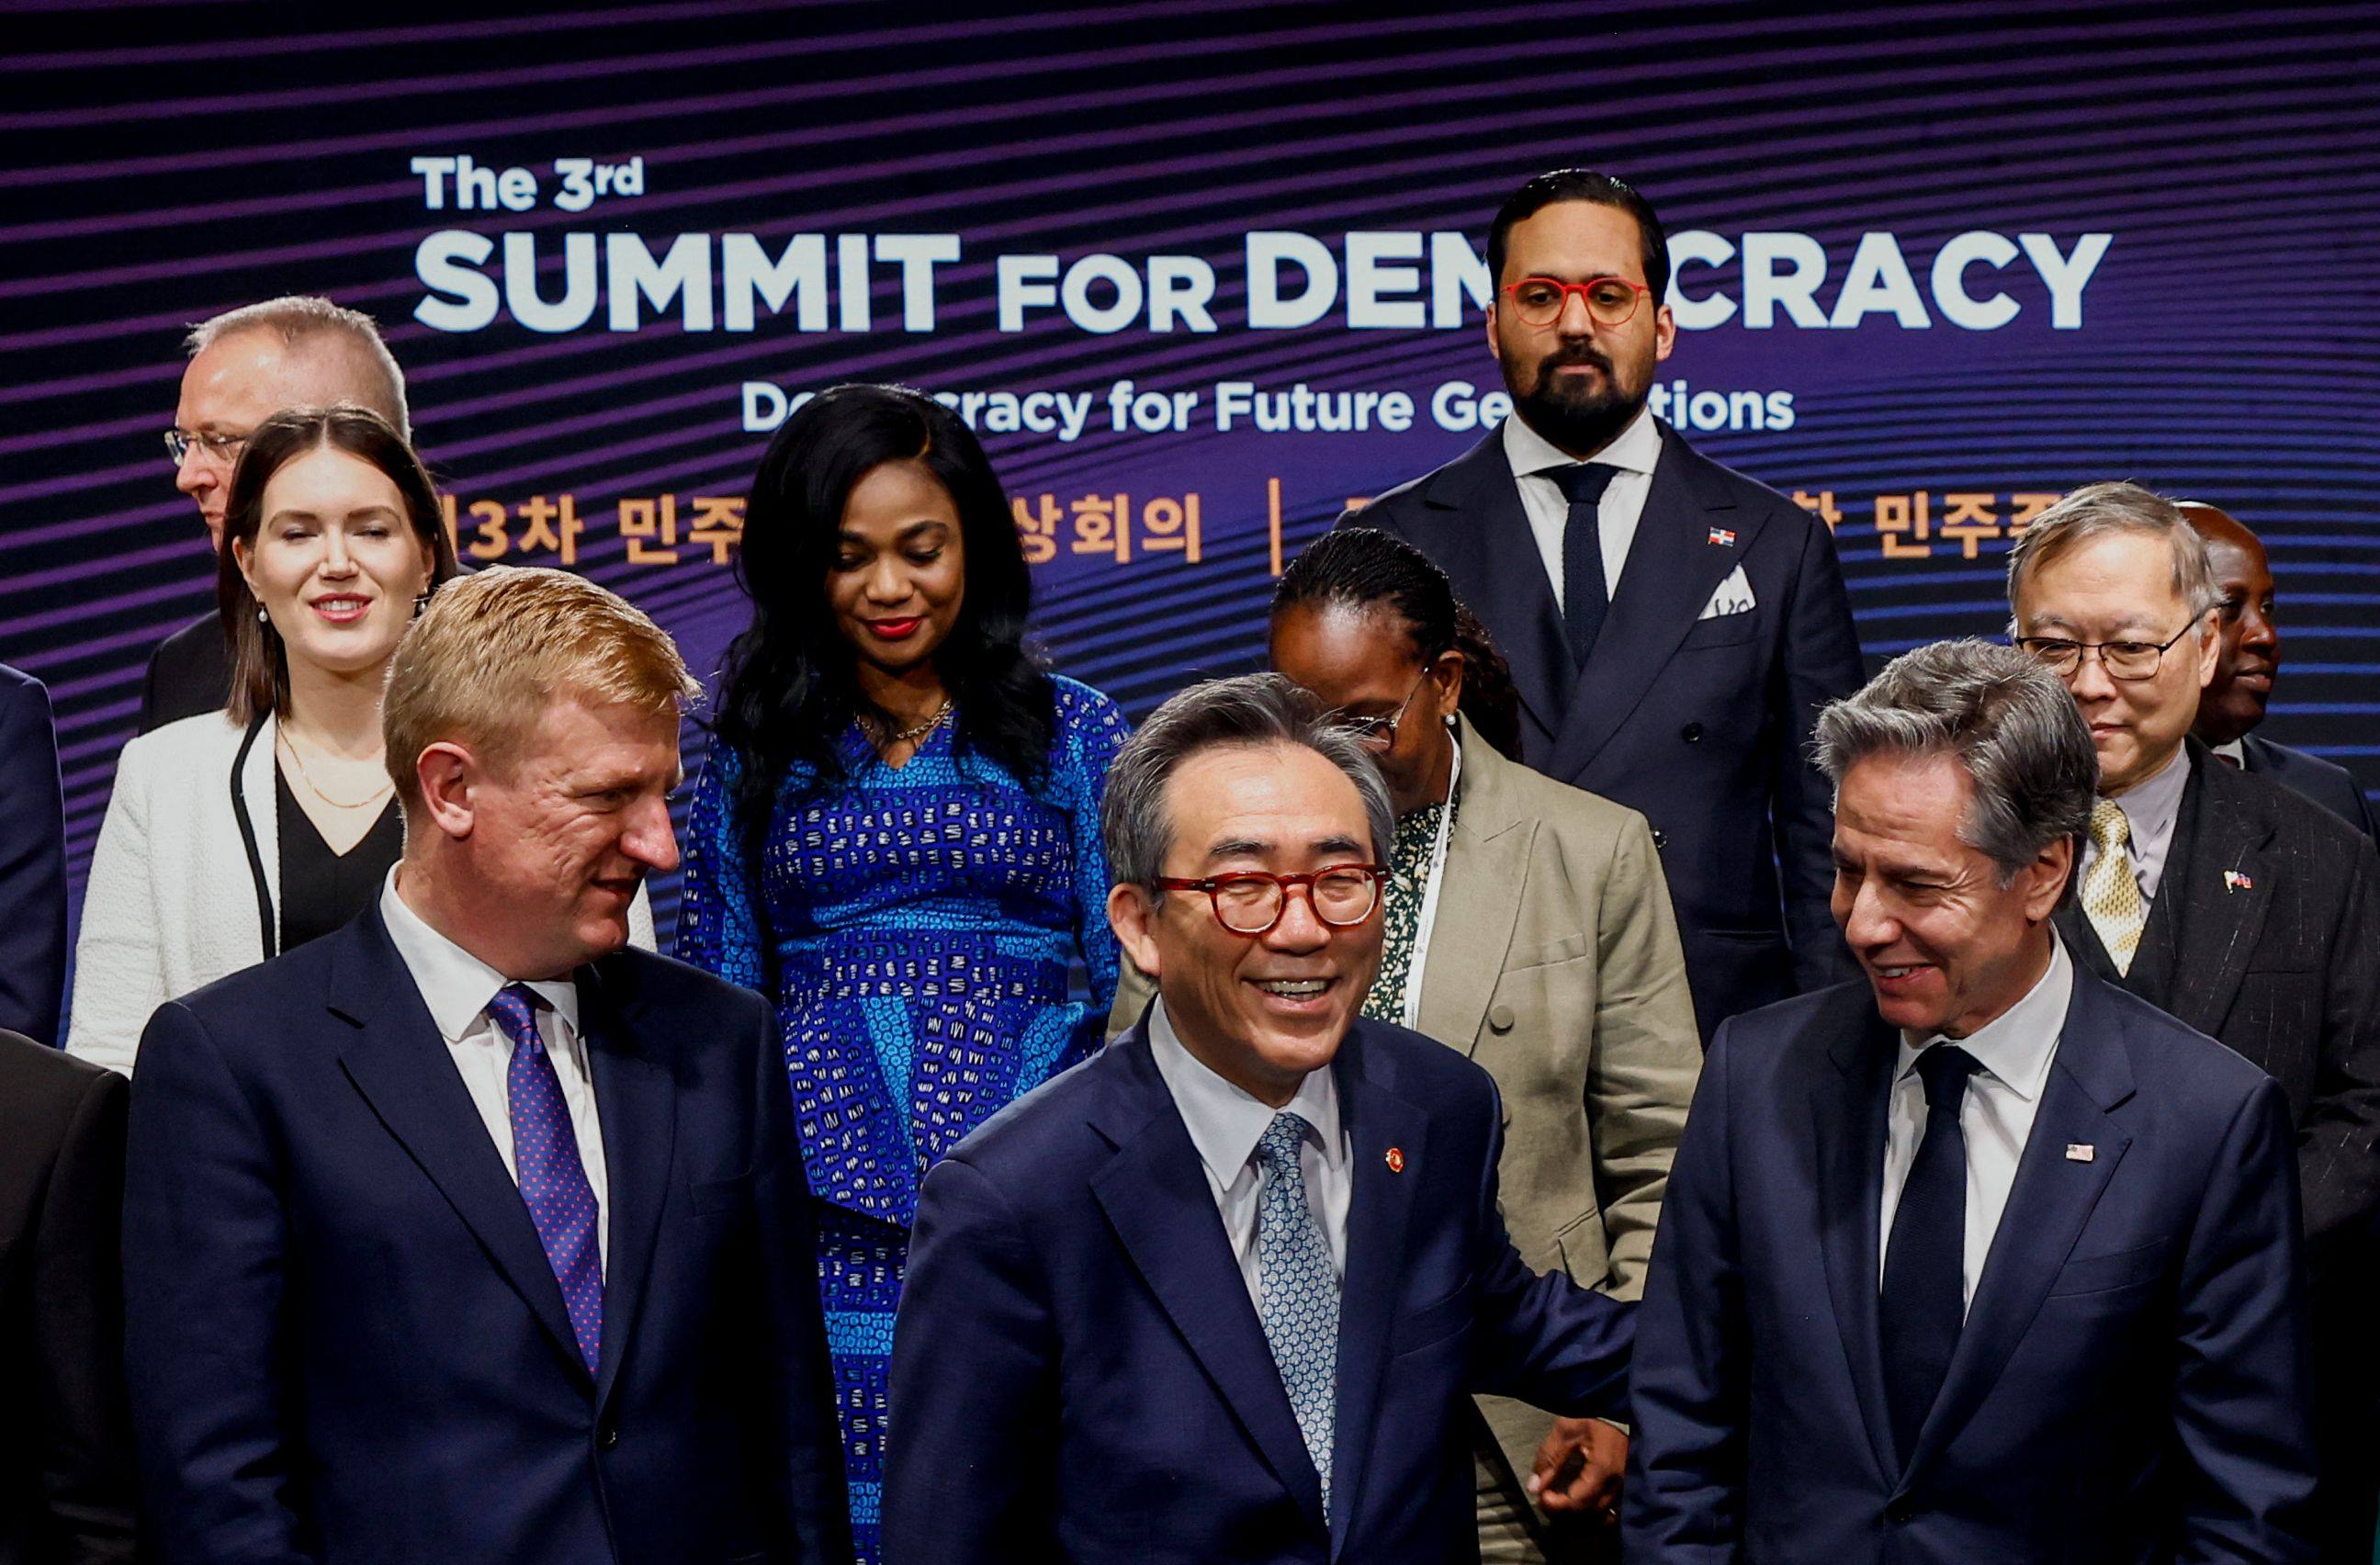 US Secretary of State Antony Blinken (right) speaks with South Korean Foreign Minister Cho Tae-yul as Britain’s Deputy Prime Minister Oliver Dowden looks on at the Summit for Democracy in Seoul. Photo: AFP